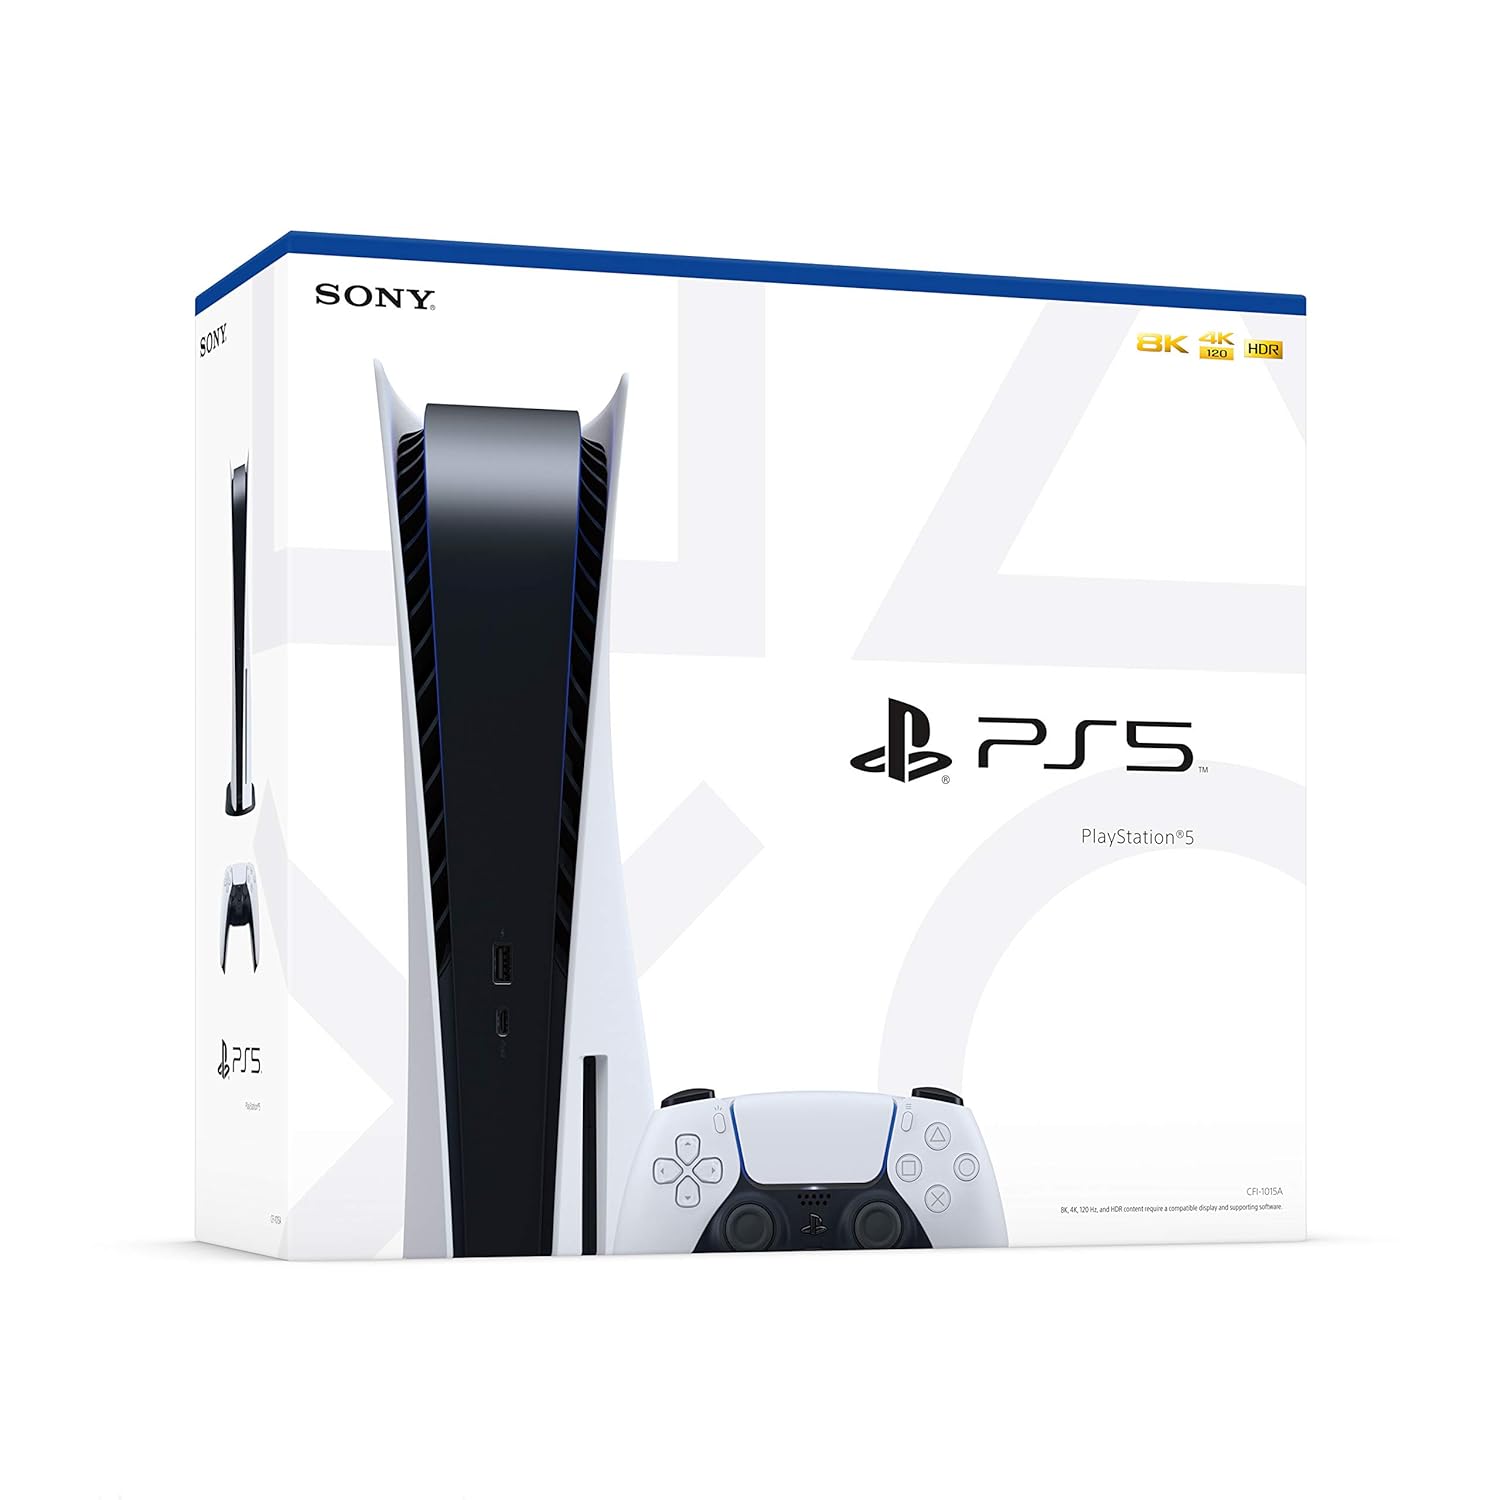 6351a469223992491d200185-playstation-5-console